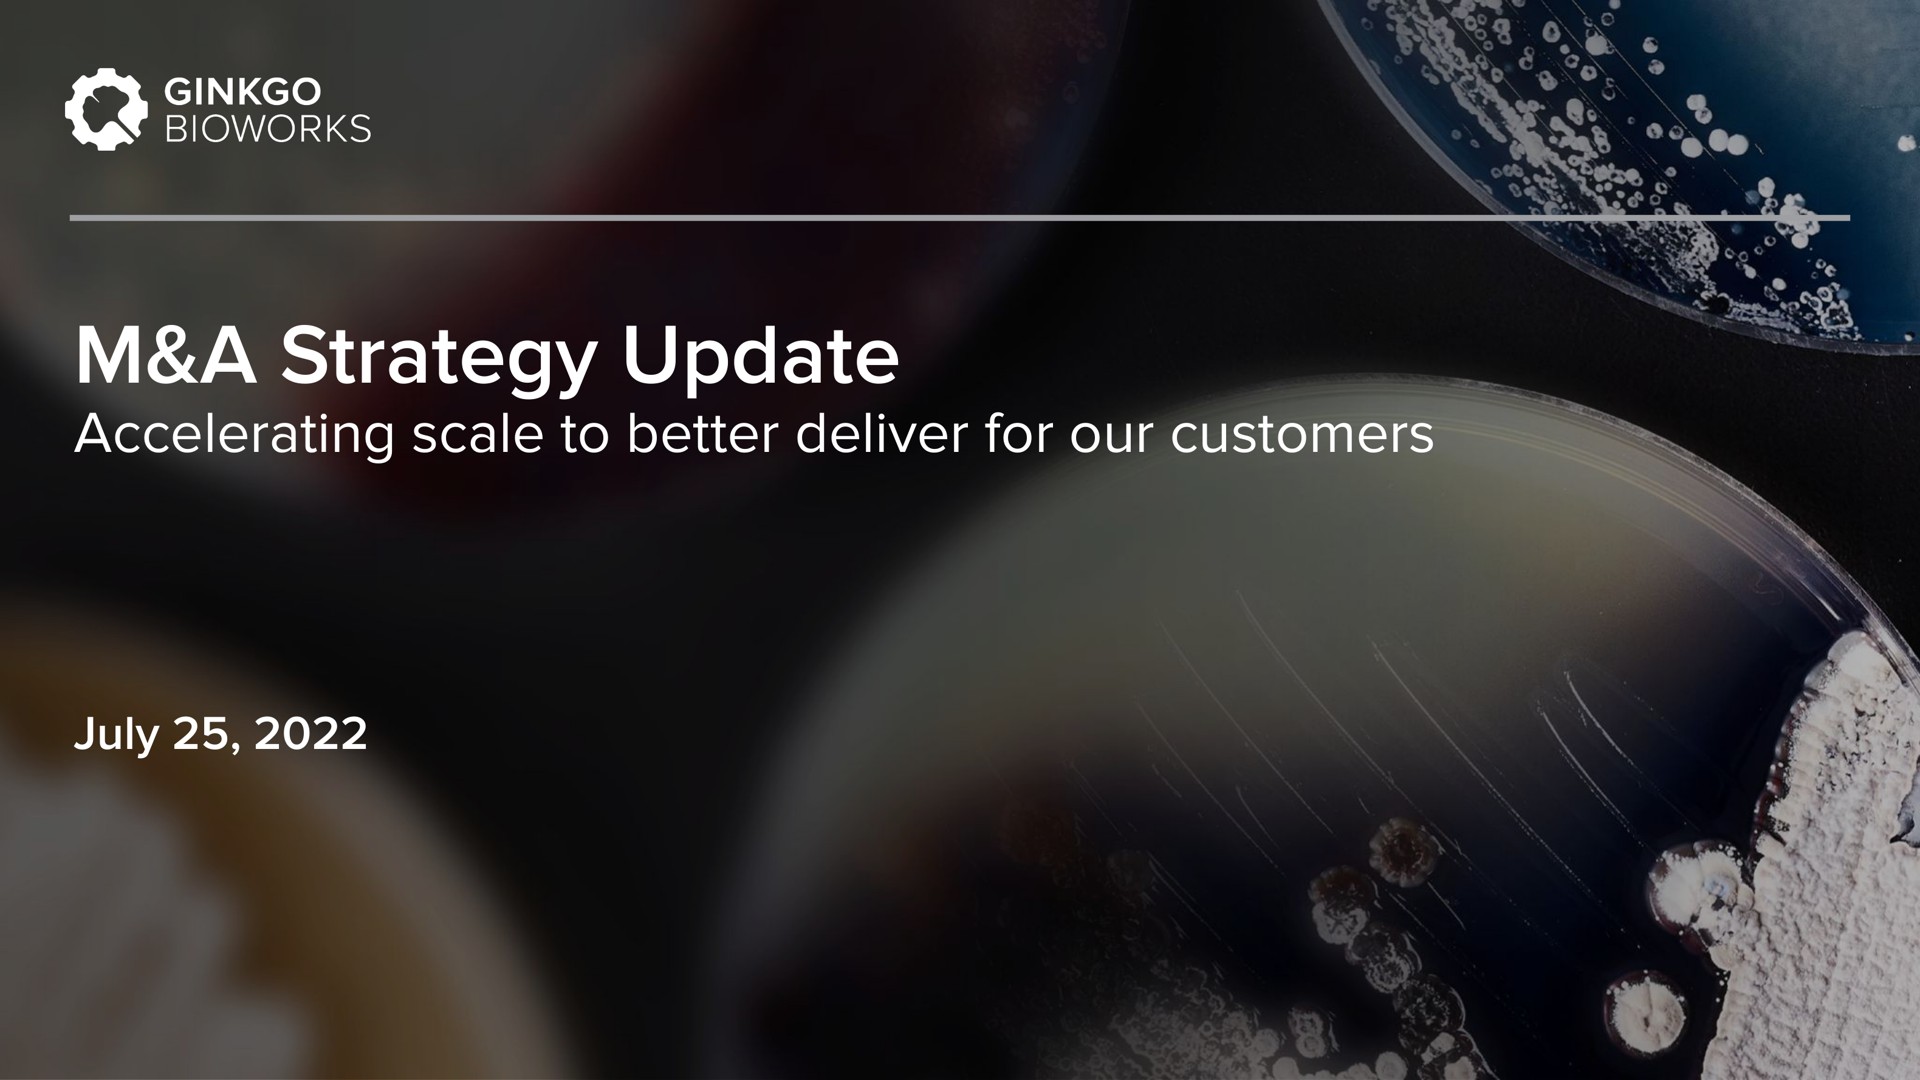 a strategy update accelerating scale to better deliver for our customers ginkgo | Ginkgo